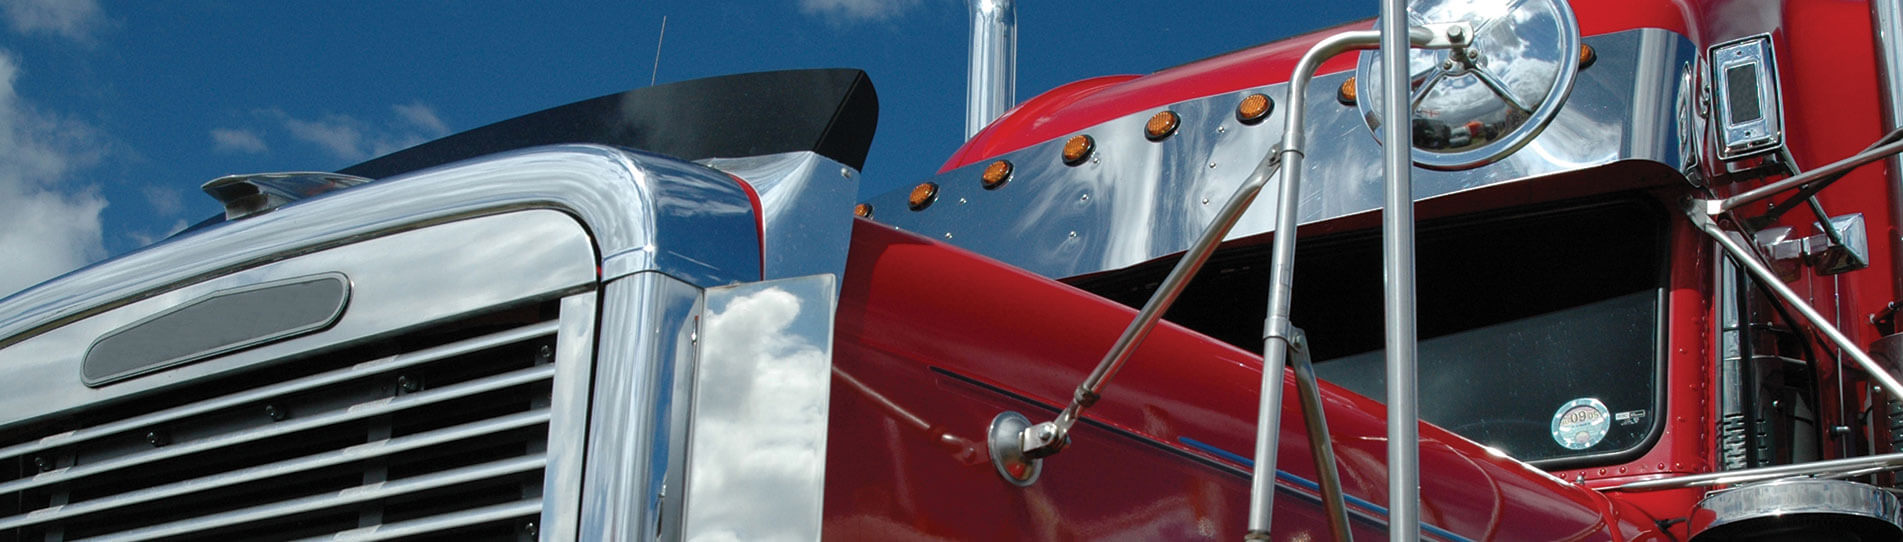 Loughman Trucking Services, Trucking Company and Freight Forwarding Services